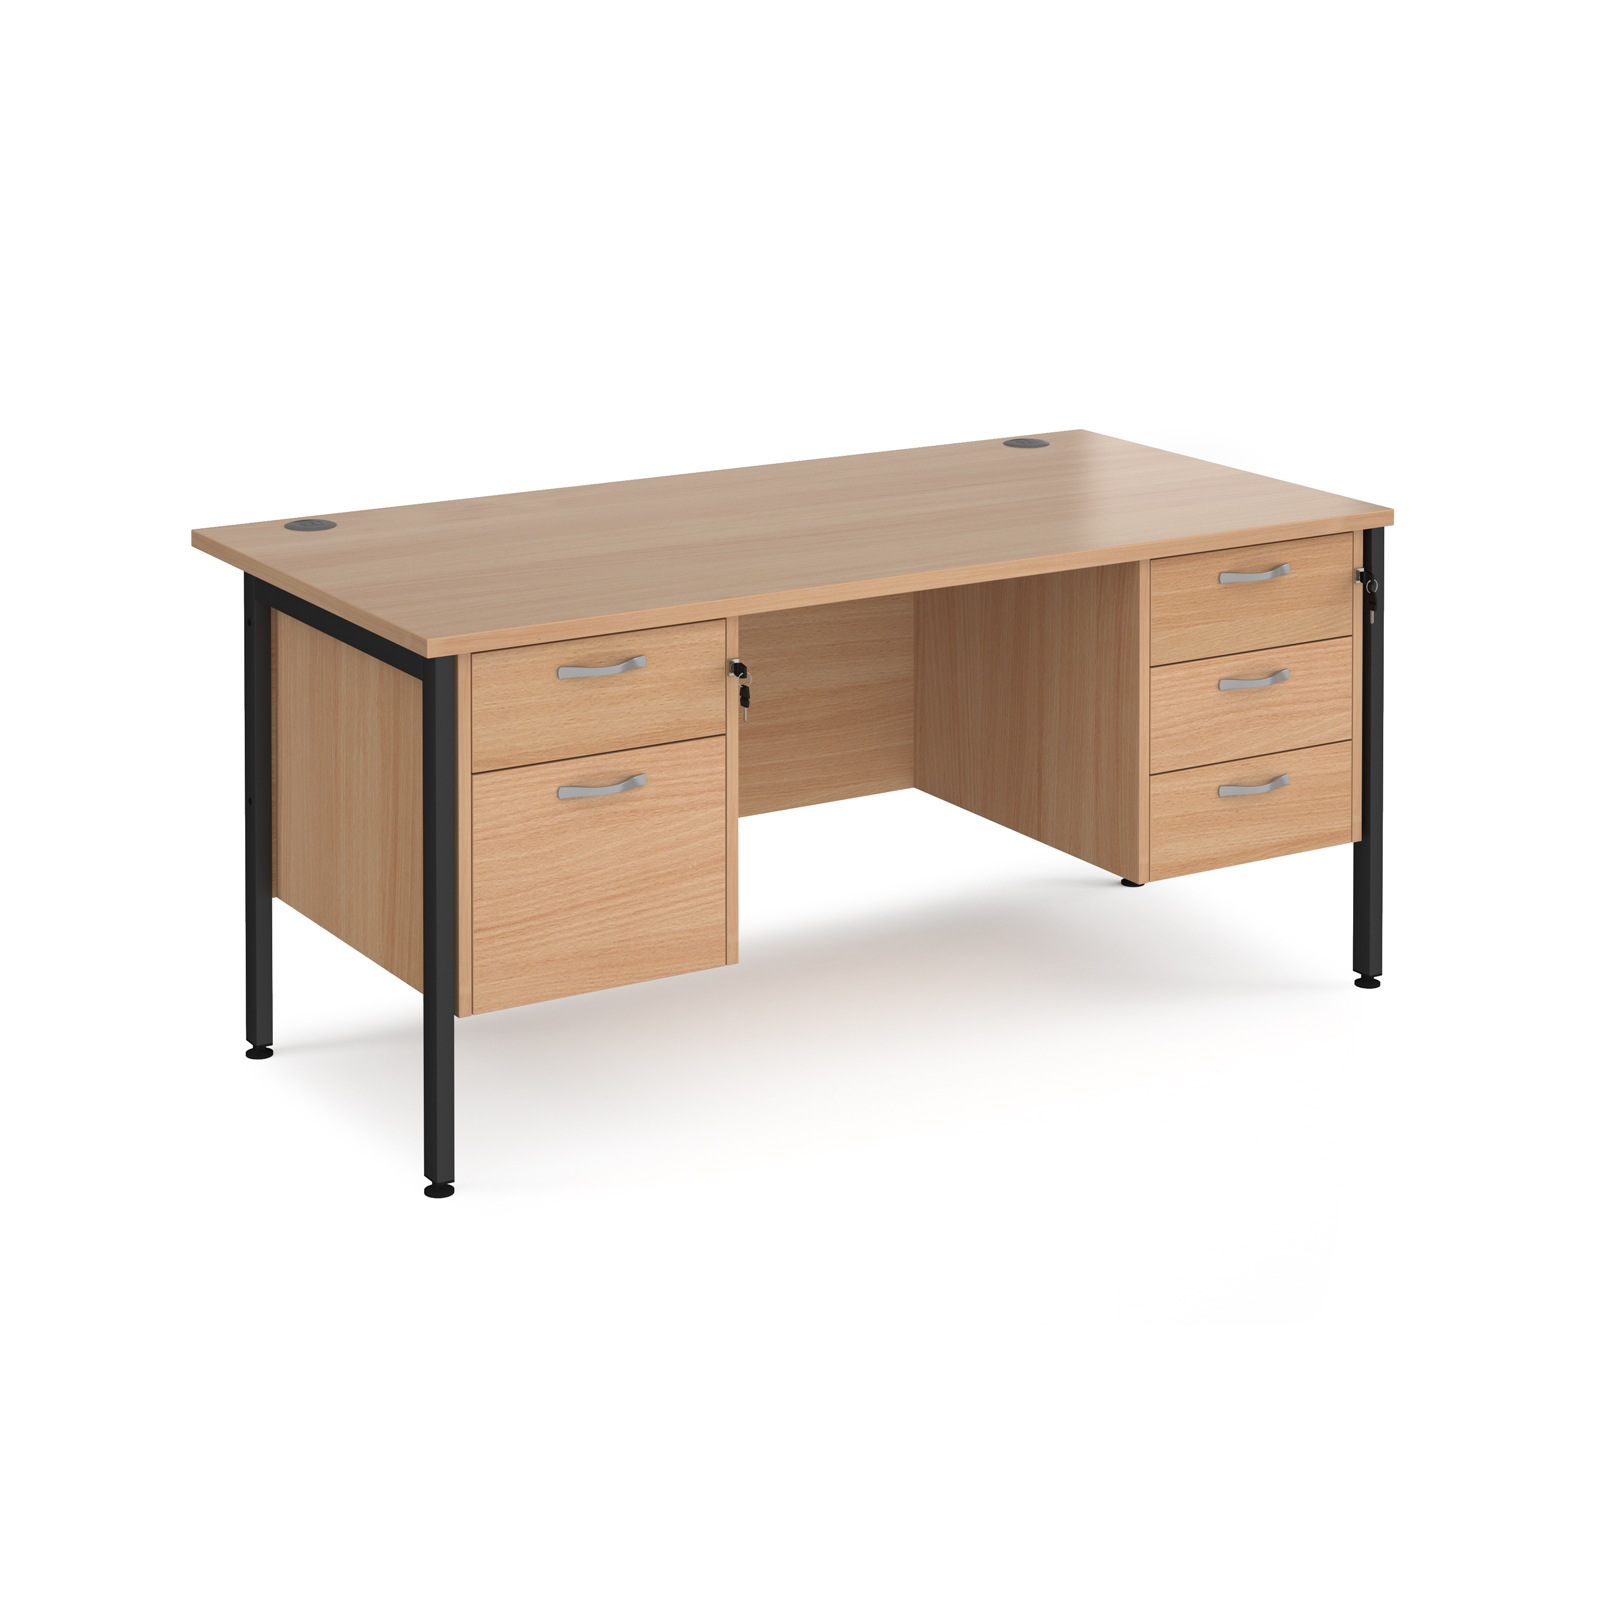 Maestro 25 straight desk 1600mm x 800mm with 2 and 3 drawer pedestals - black H-frame leg, beech top